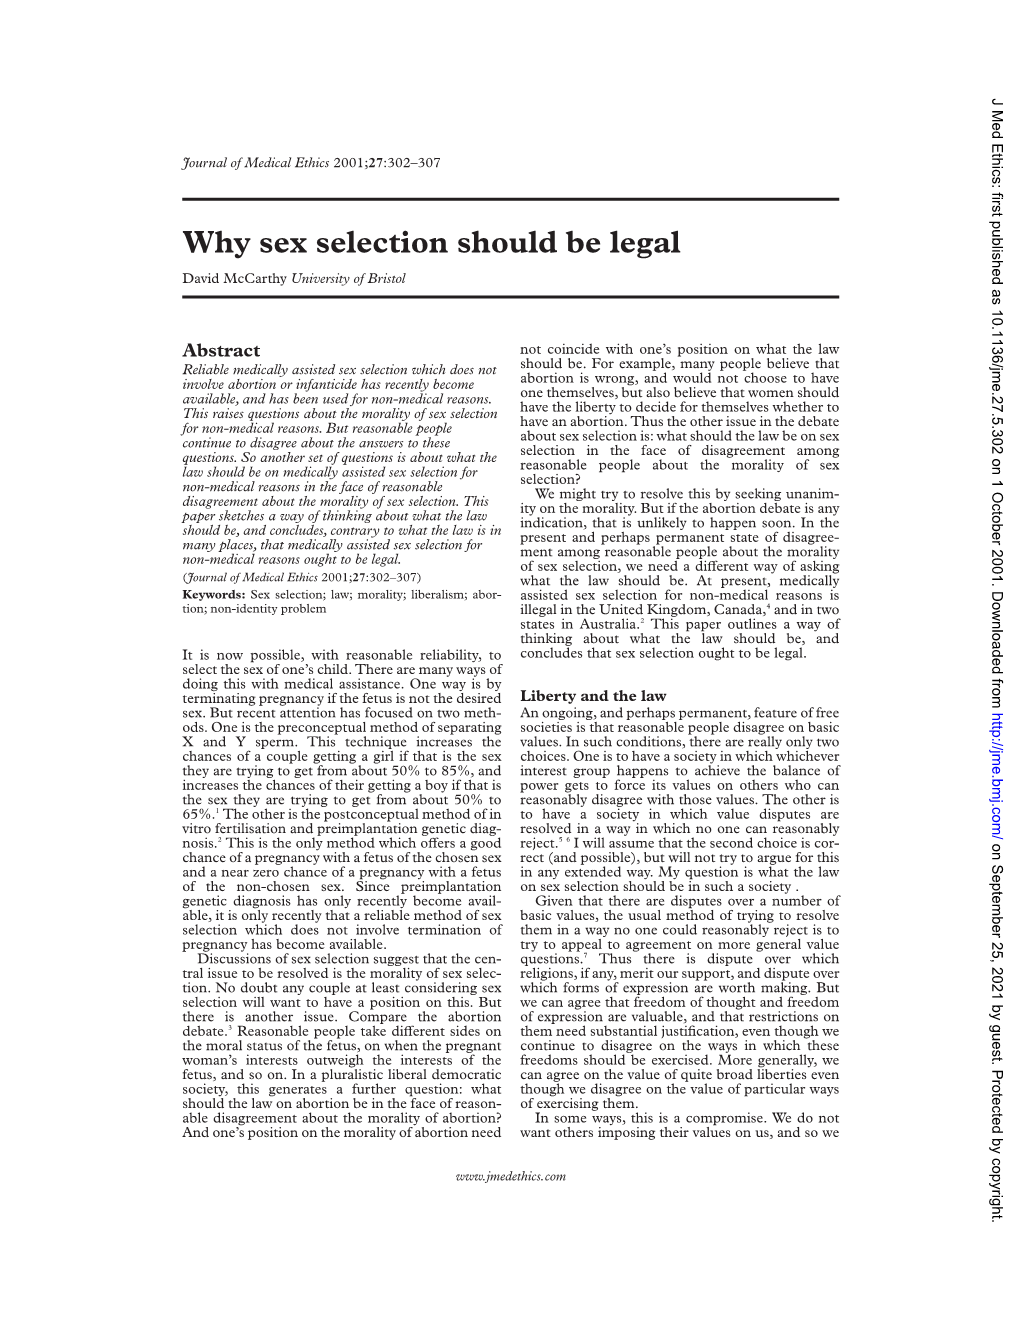 Why Sex Selection Should Be Legal David Mccarthy University of Bristol